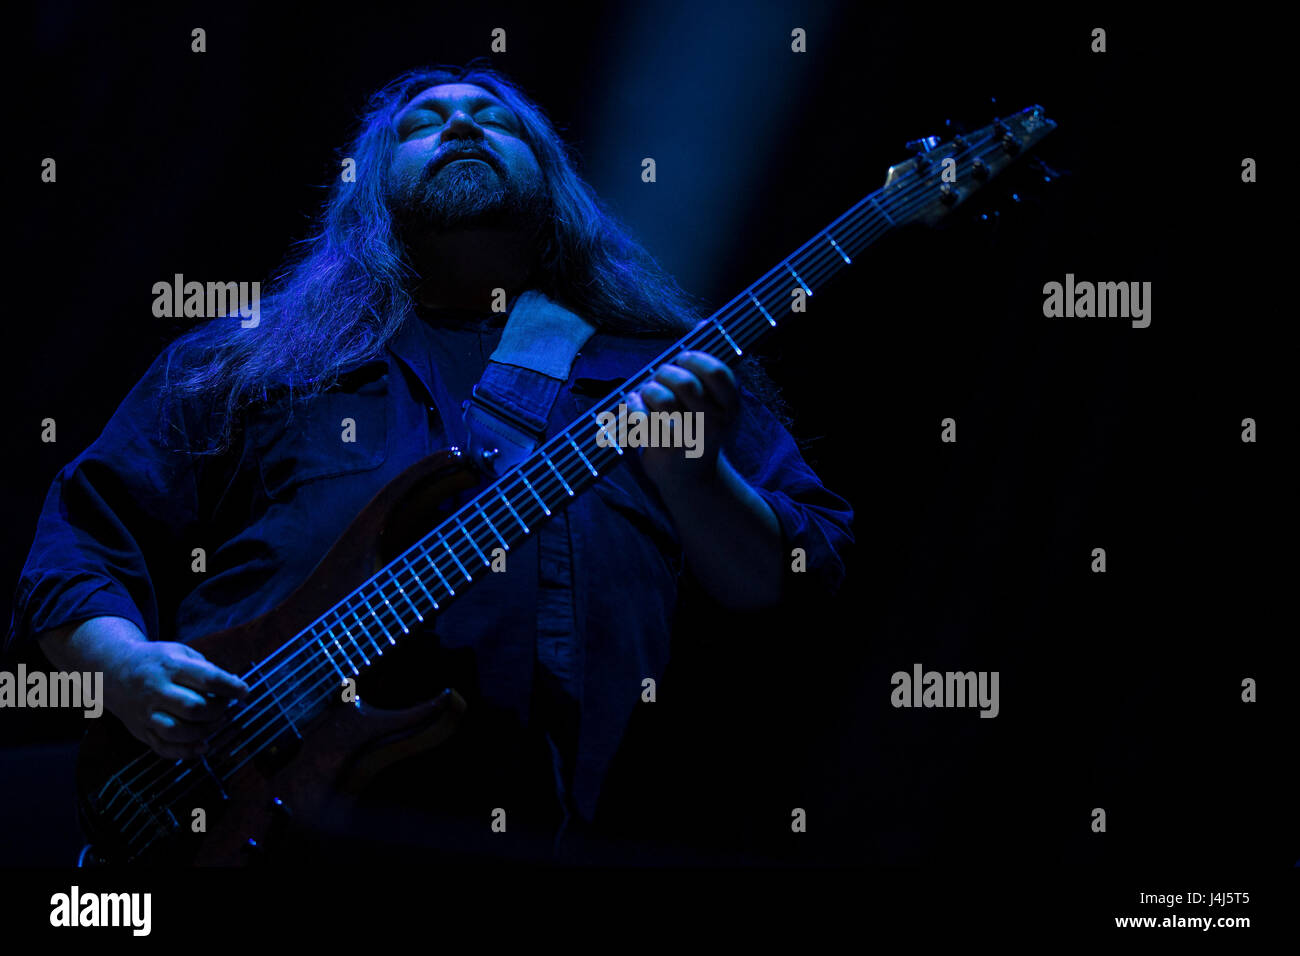 Dave Schools, bass player of Widespread Panic performs at the 2017 Beale Street Music Festival at Tom Lee Park in Memphis, Tenn. on May 5, 2017. Stock Photo